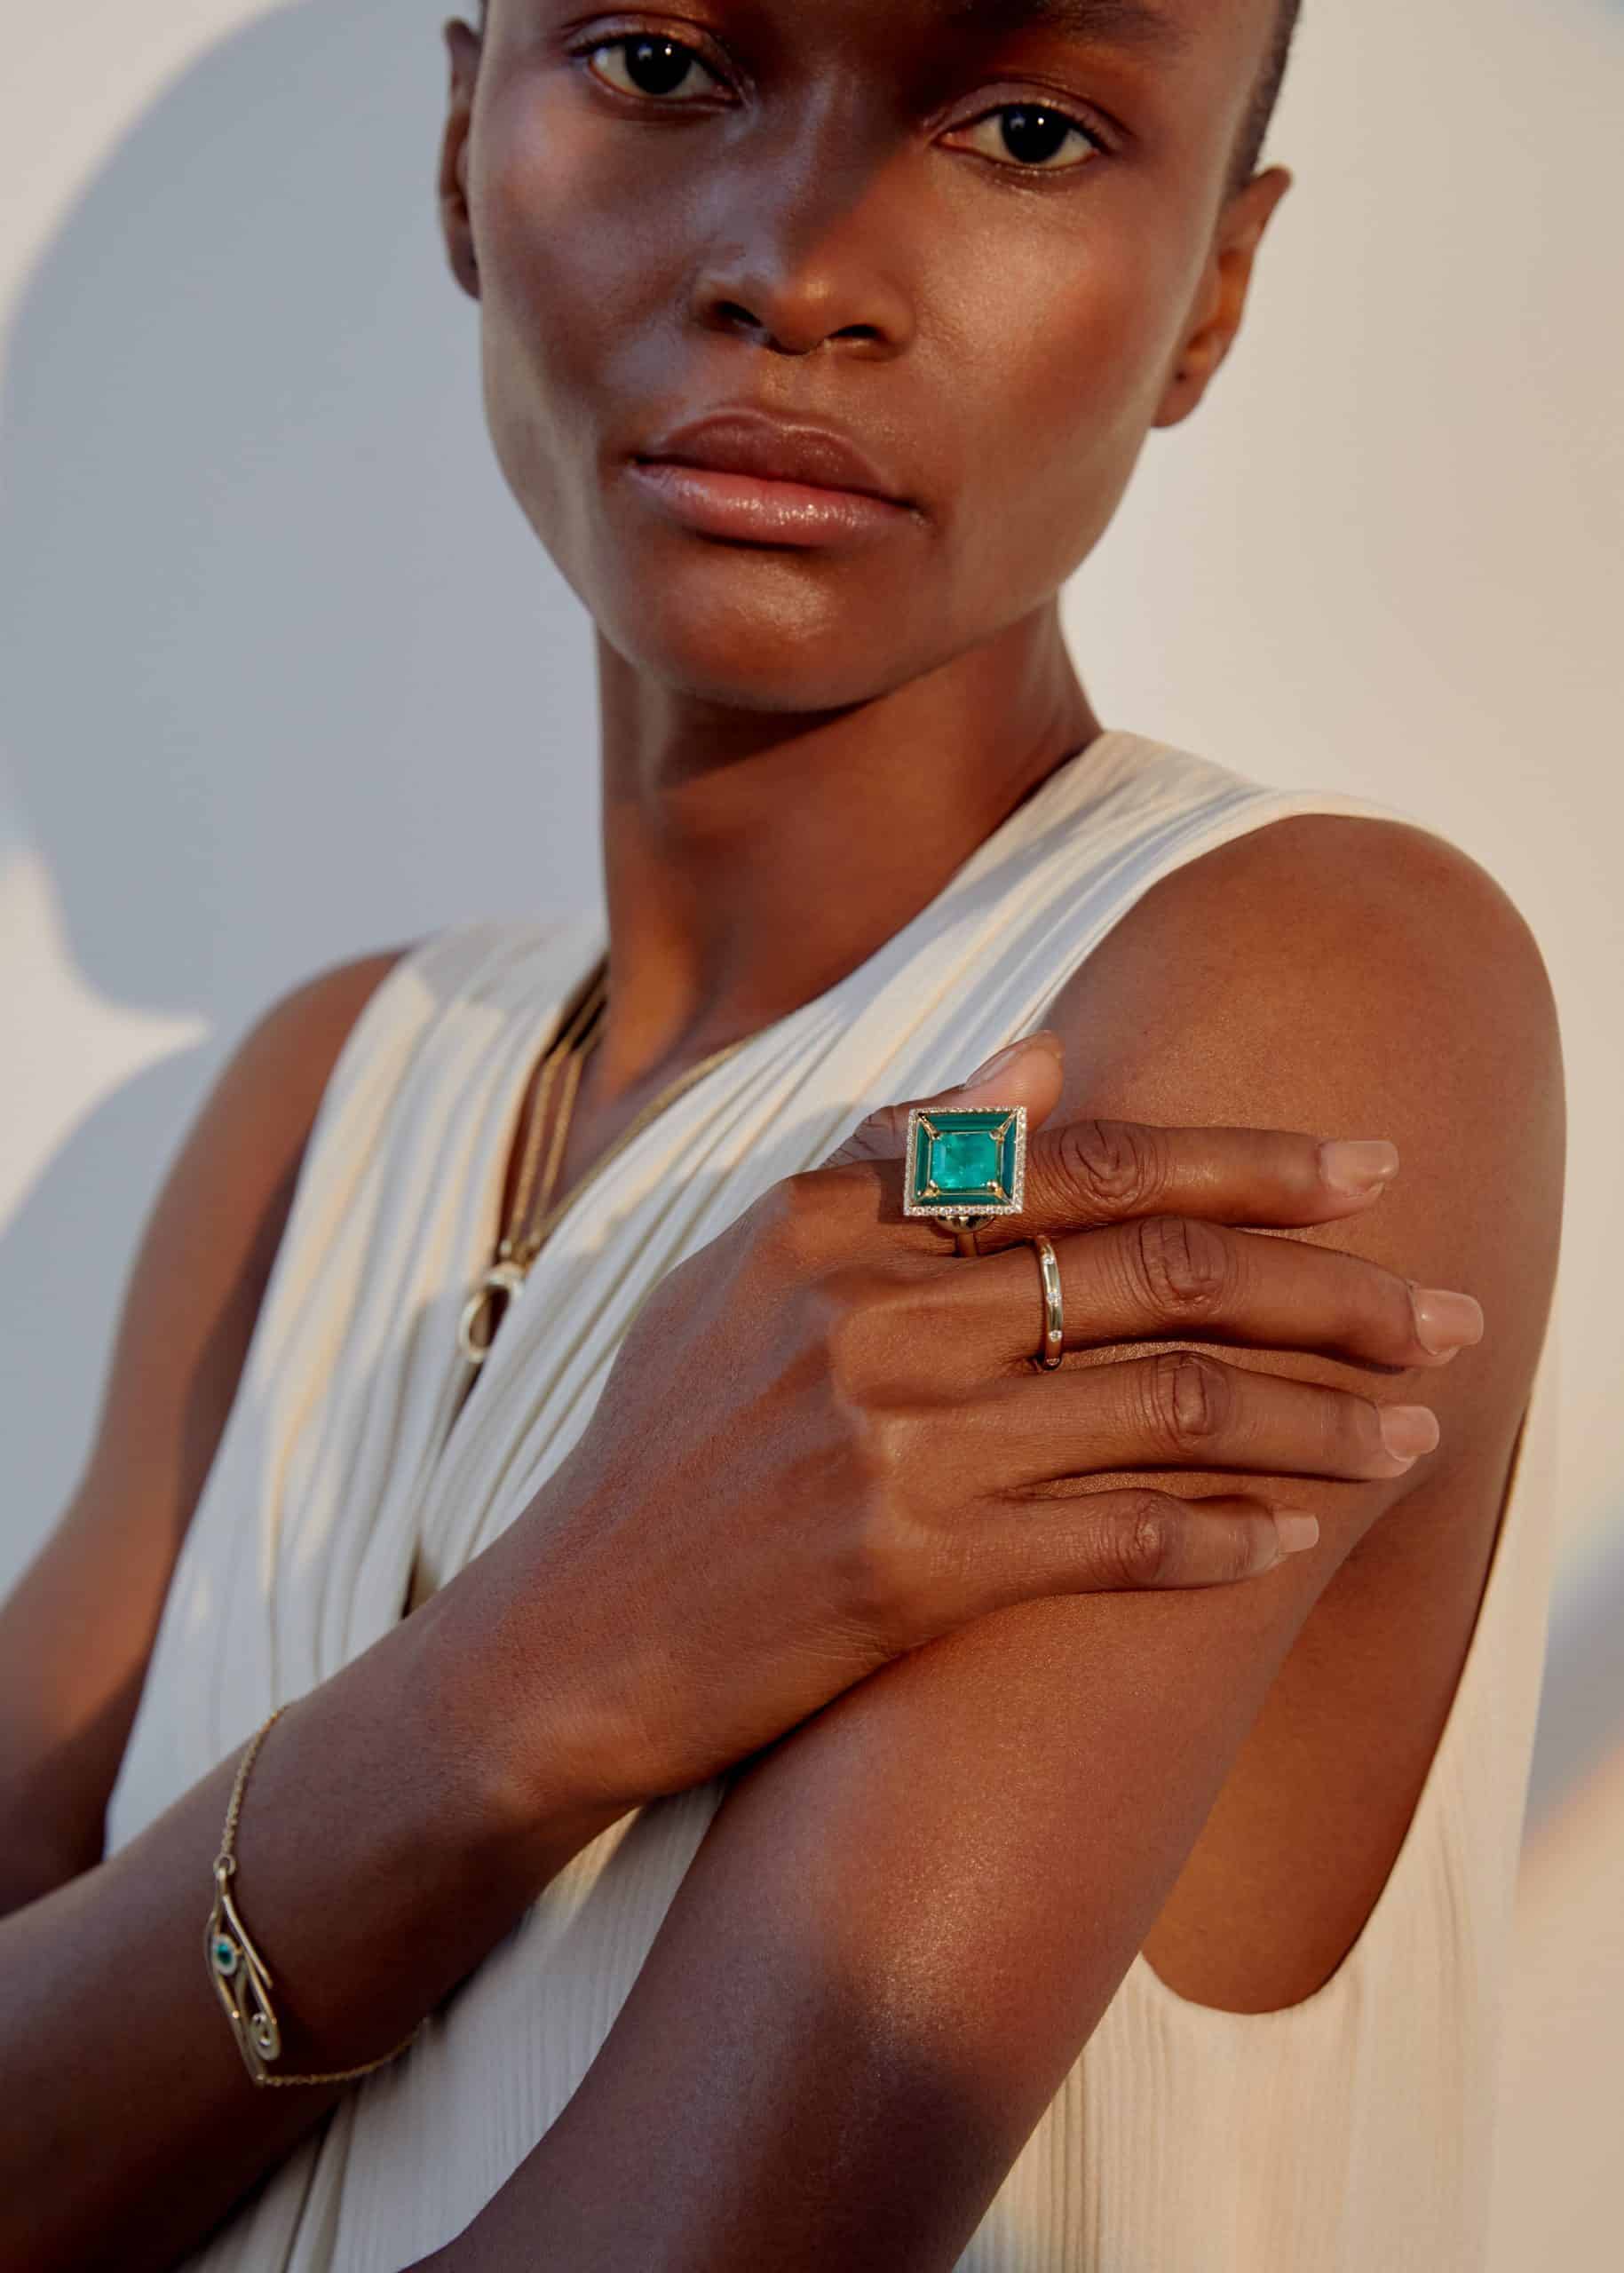 Jewelry brand Khiry has debuted its first fine jewelry collection